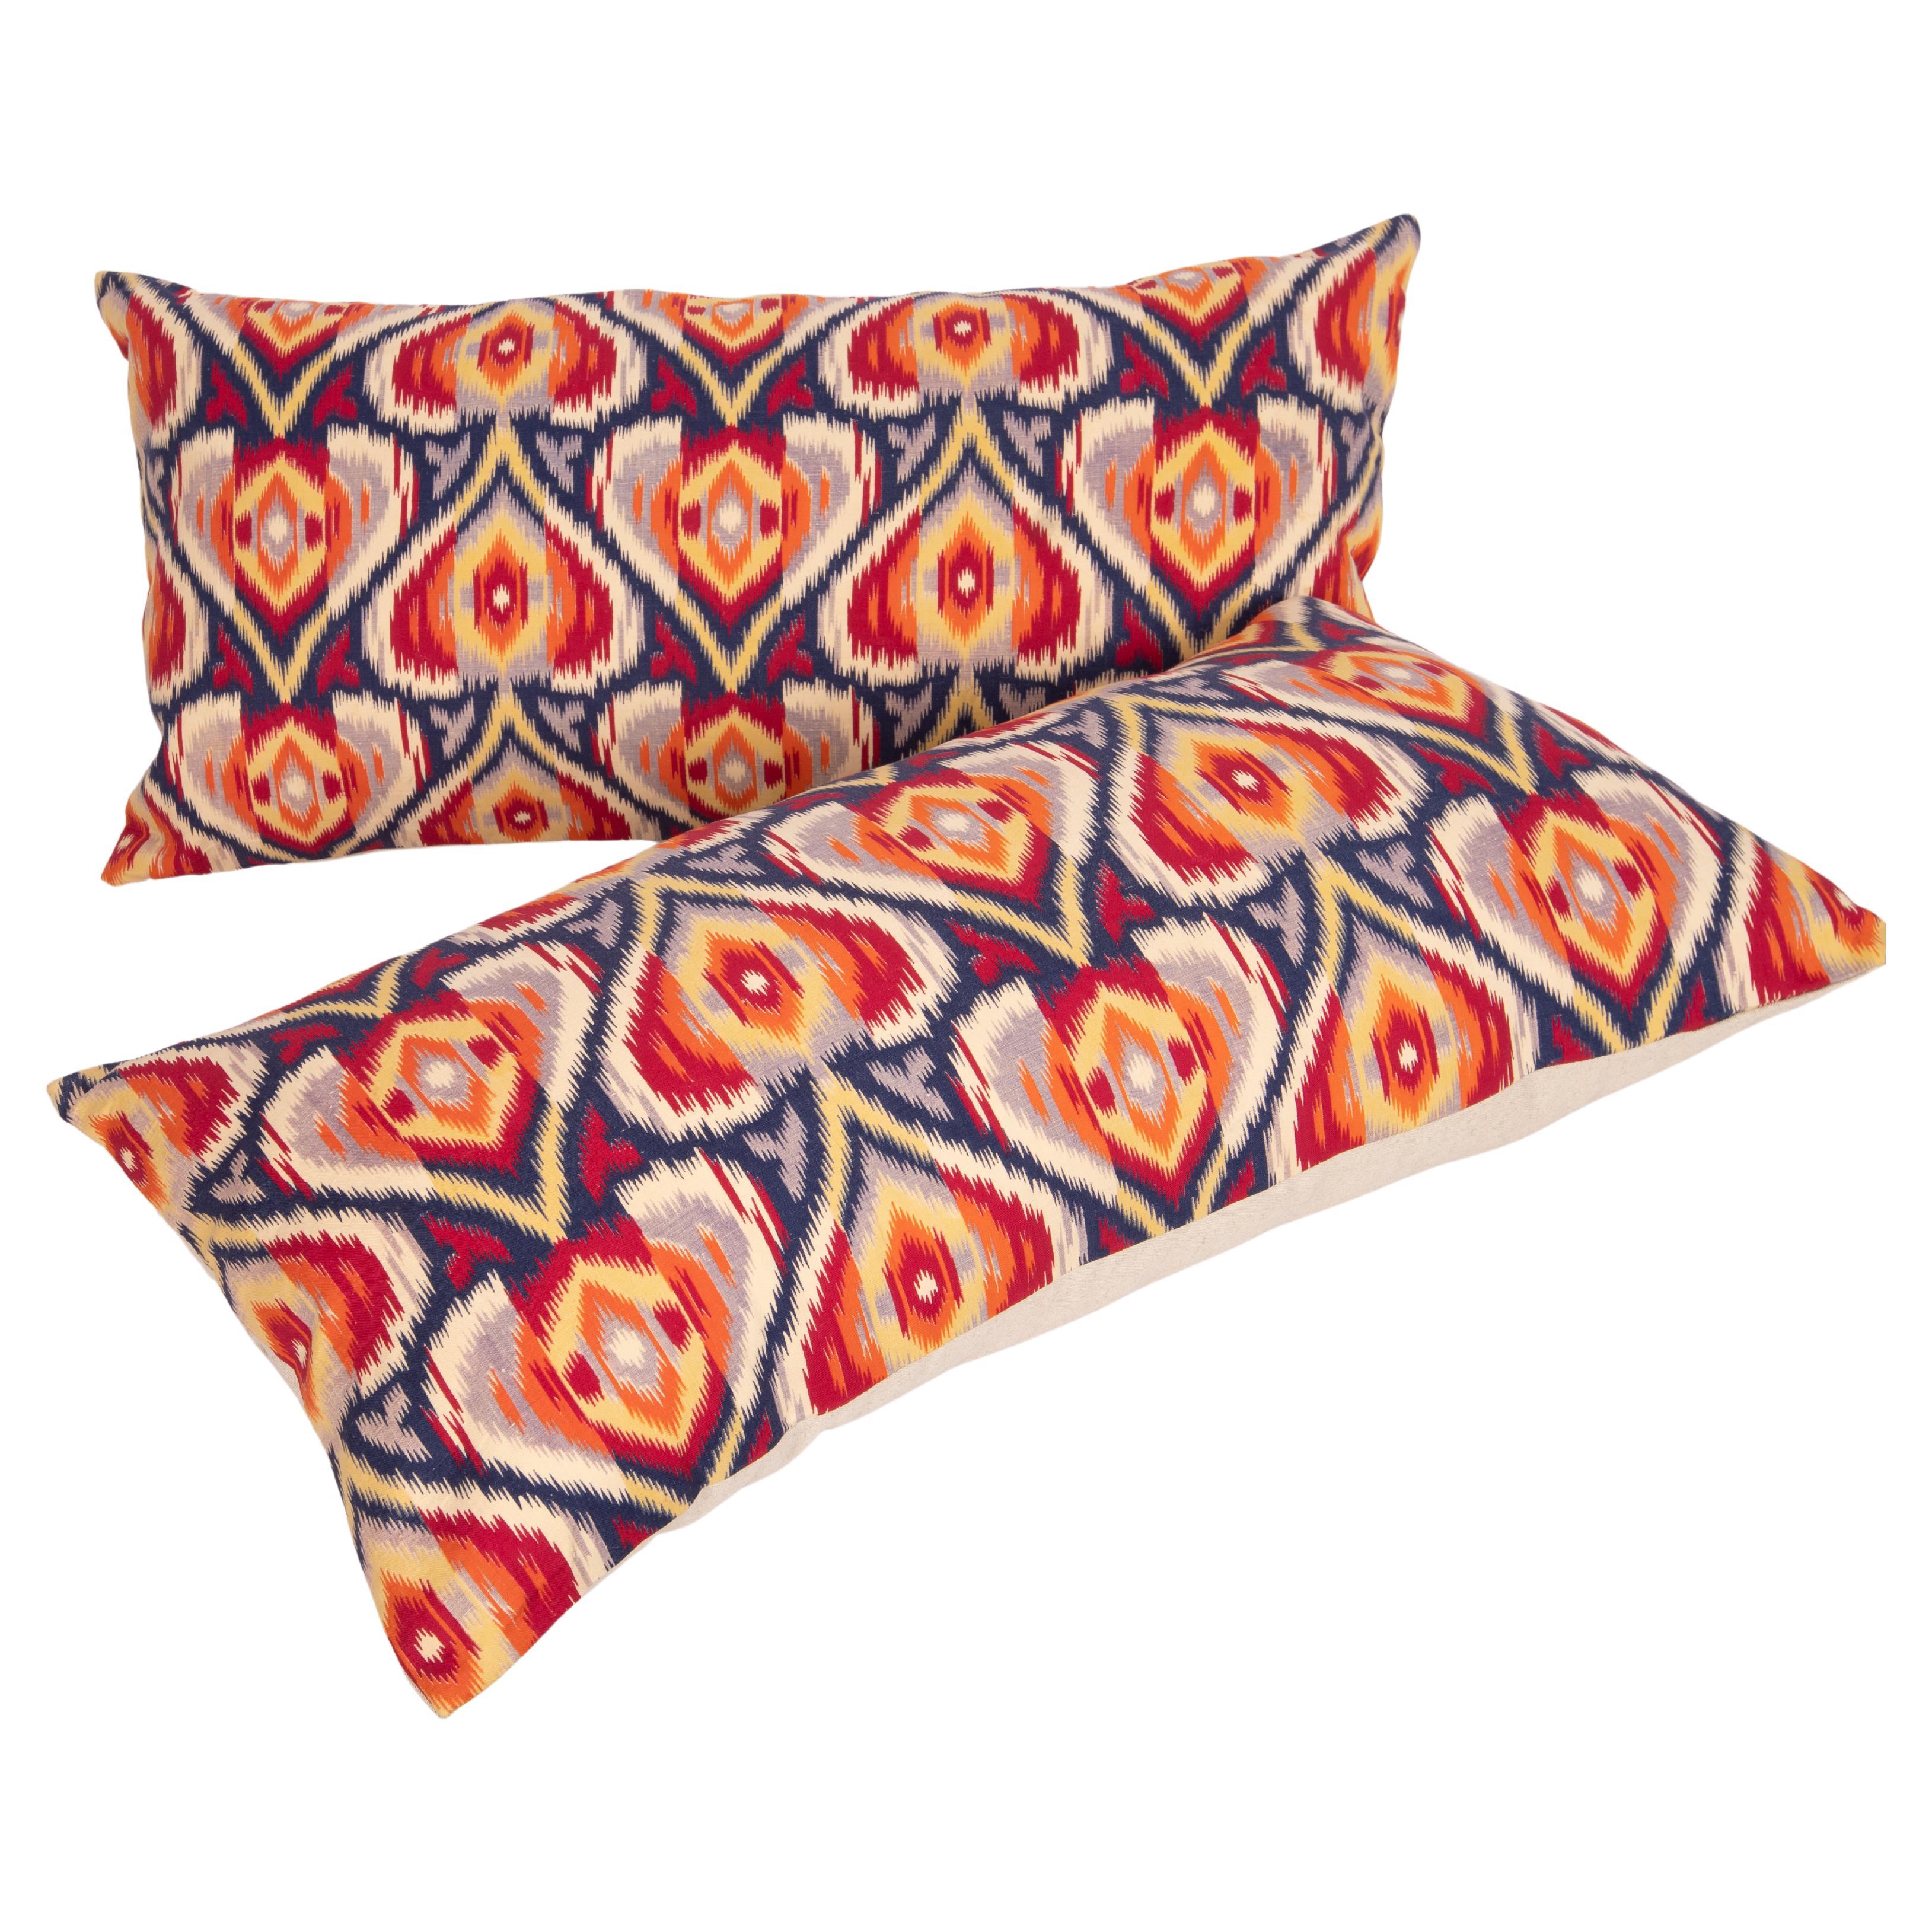 Russian Roller Printed Pillow Covers, Mid 20th C. For Sale